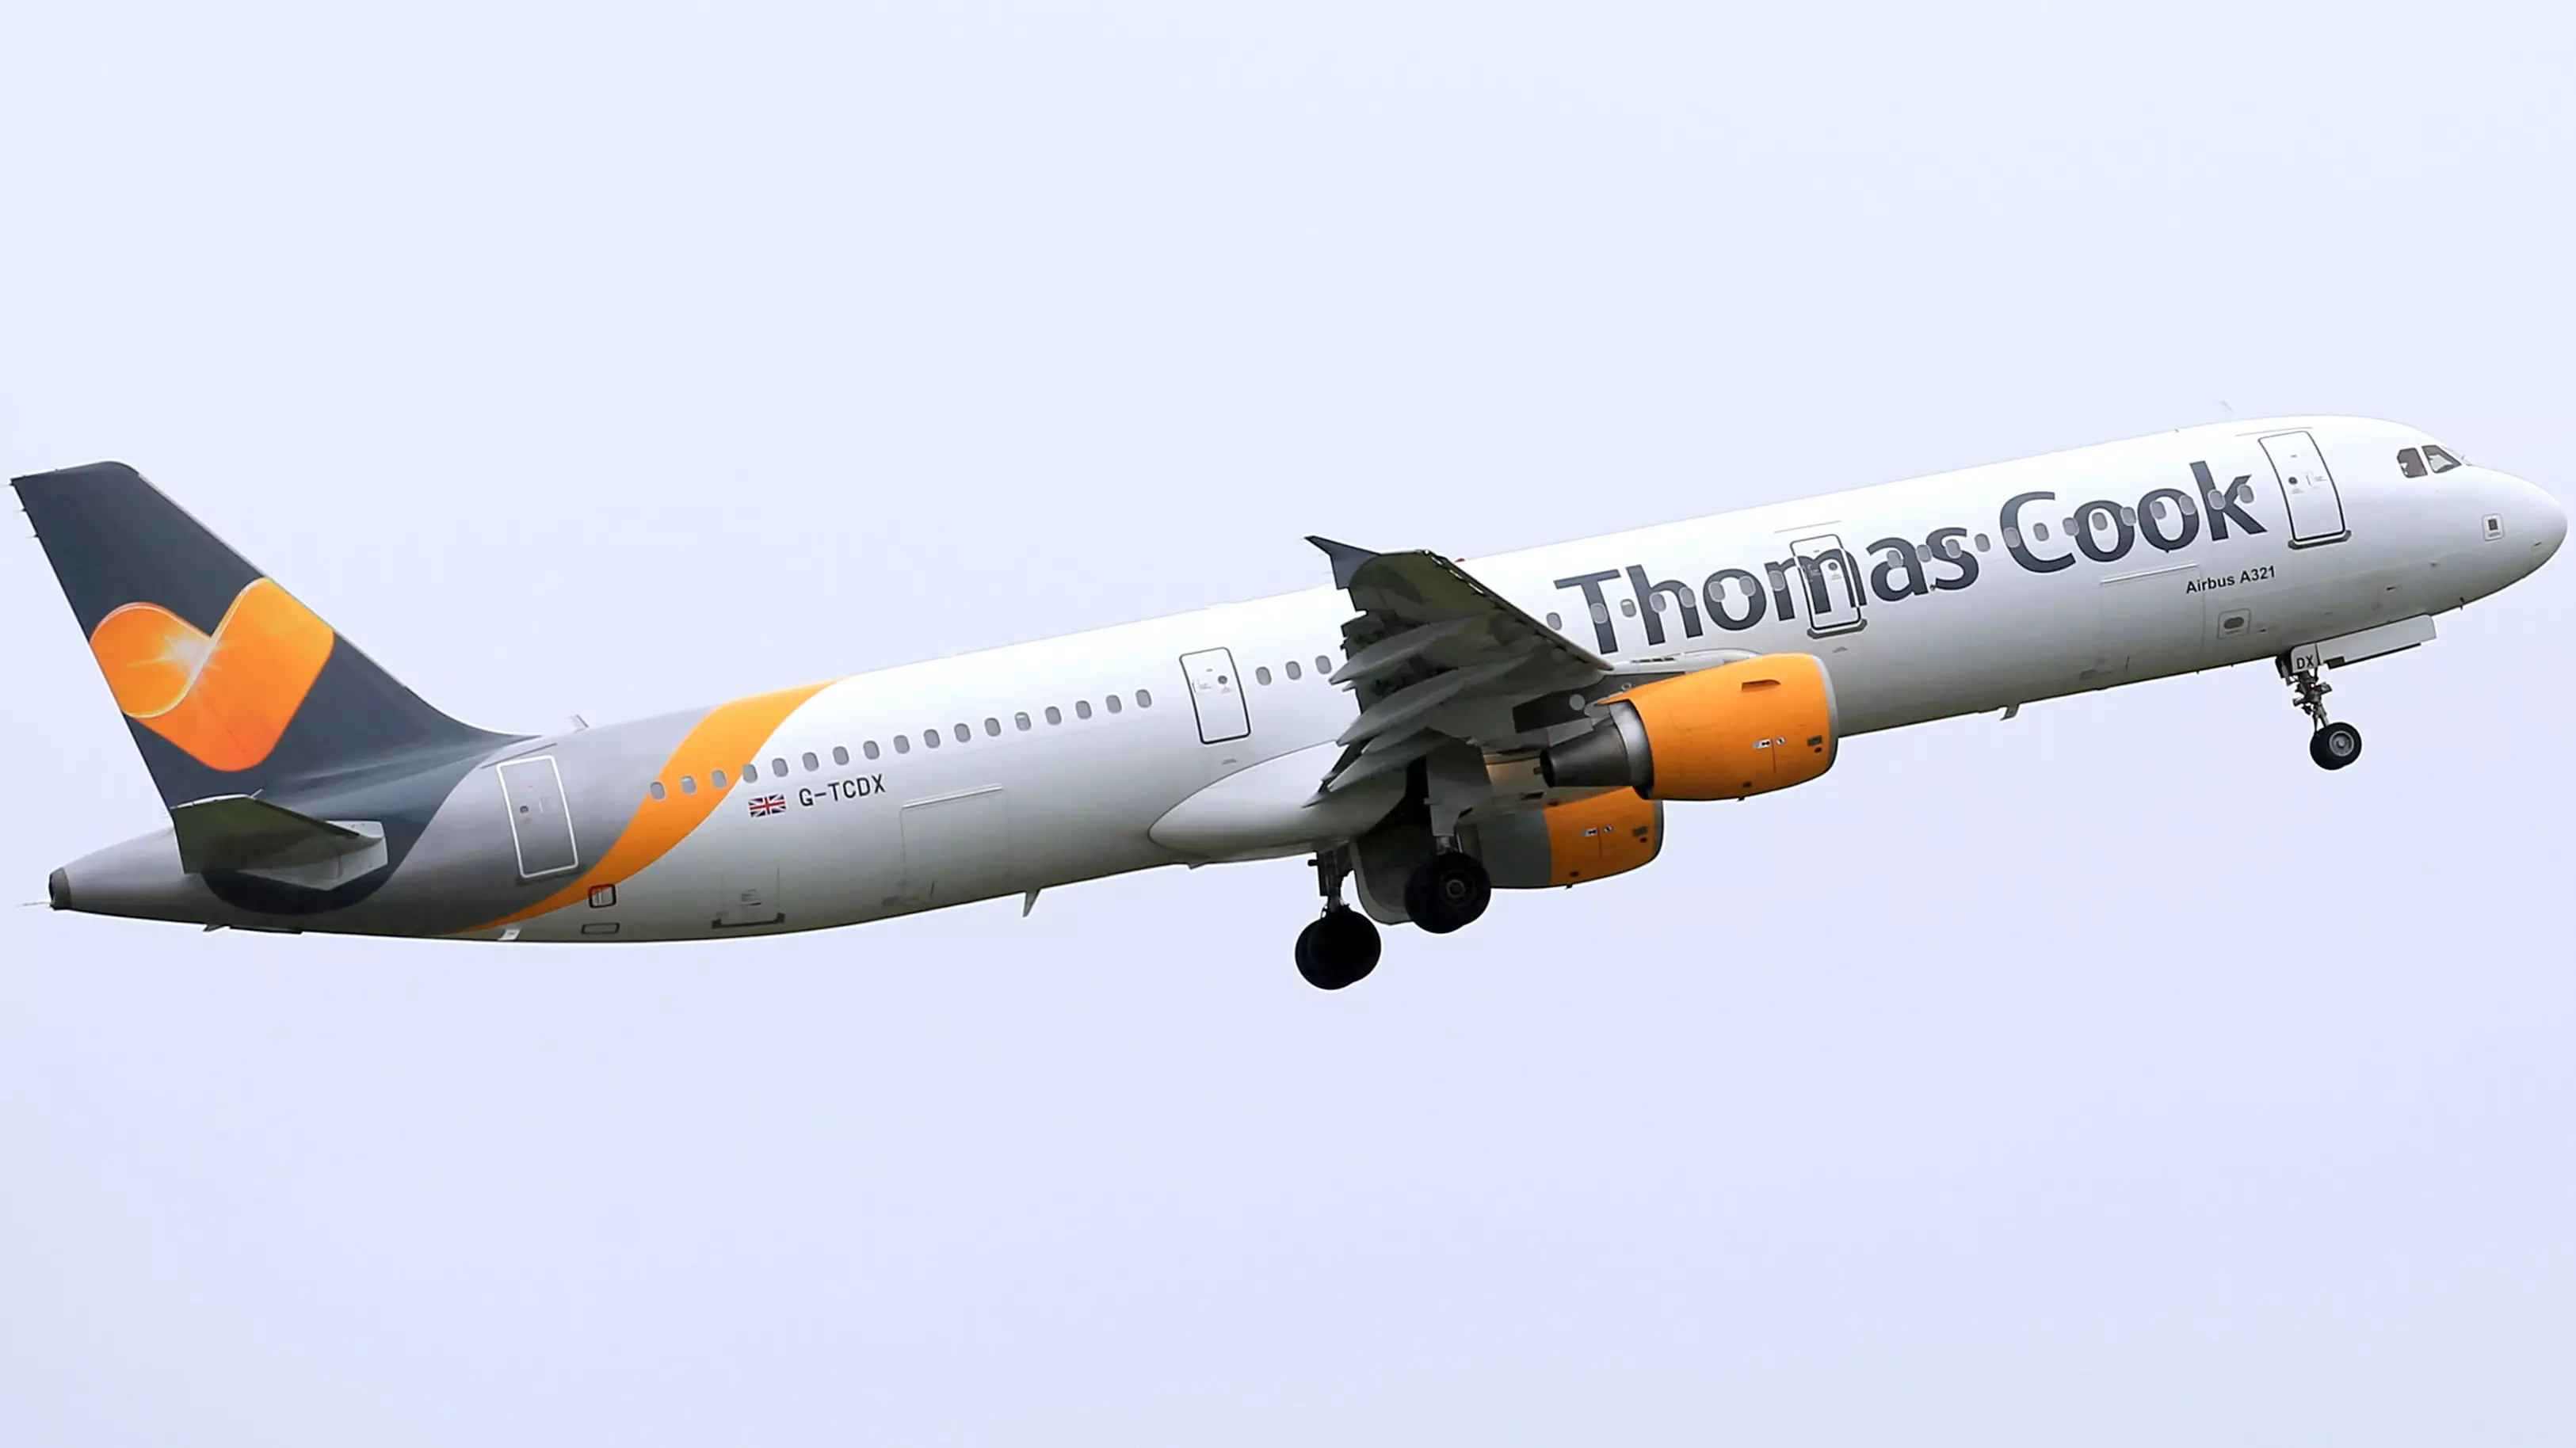 Thomas Cook Staff Threaten To Kick Woman Off Flight Over 'Inappropriate' Outfit